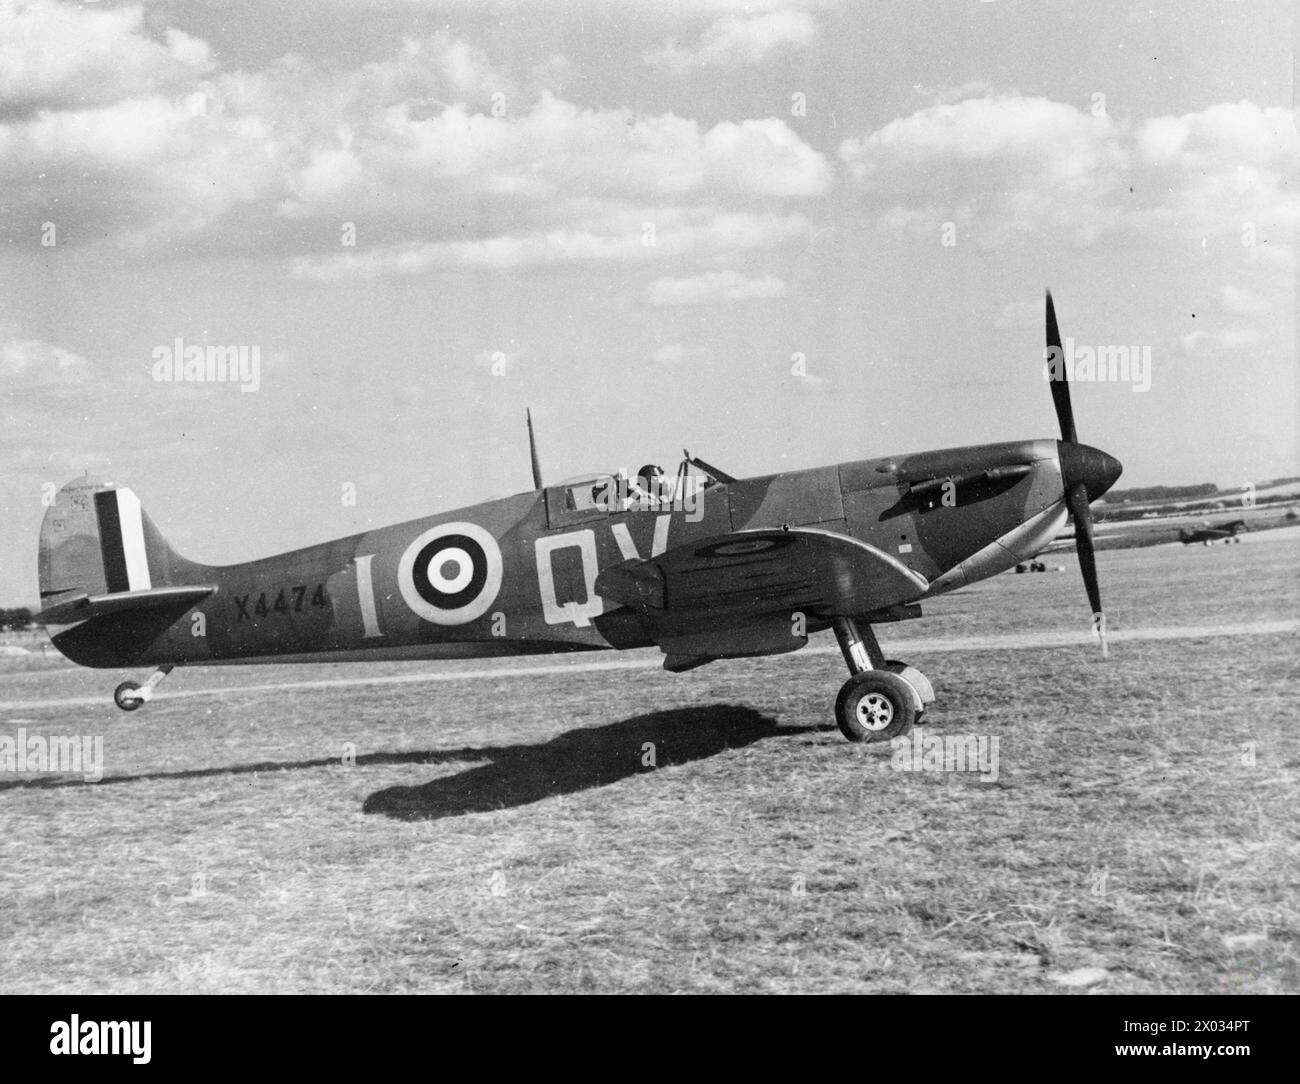 THE BATTLE OF BRITAIN 1940 - Spitfire Mk Ia X4474 QV-I of No. 19 Squadron taking off from Fowlmere, September 1940  Royal Air Force, 19 Squadron Stock Photo